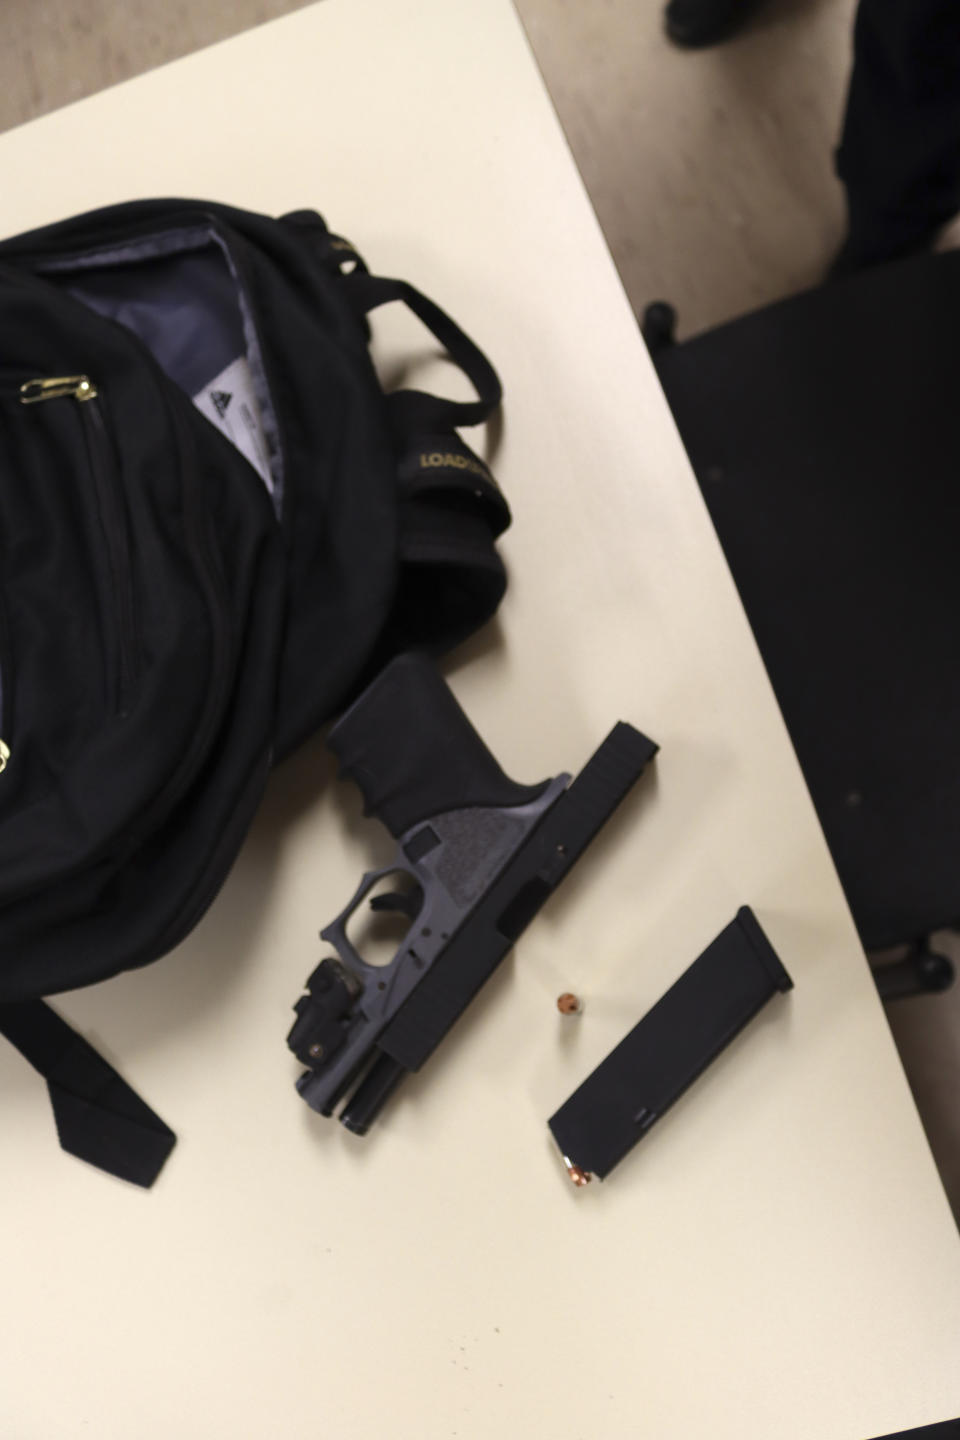 This image taken May 3, 2022, and provided by the Oak Park, Ill., Police Department, shows a gun and ammunition found in a backpack taken from Keyon Robinson outside Oak Park and River Forest High School in Oak Park, Ill. Robinson was a senior at the high school at the time and said he had brought the gun to school to protect himself after an altercation with a relative. Robinson, who said he had no plan to hurt anyone, bought the ghost gun via a gun seller who advertised on the social media site Snapchat. (Oak Park Police Department via AP)